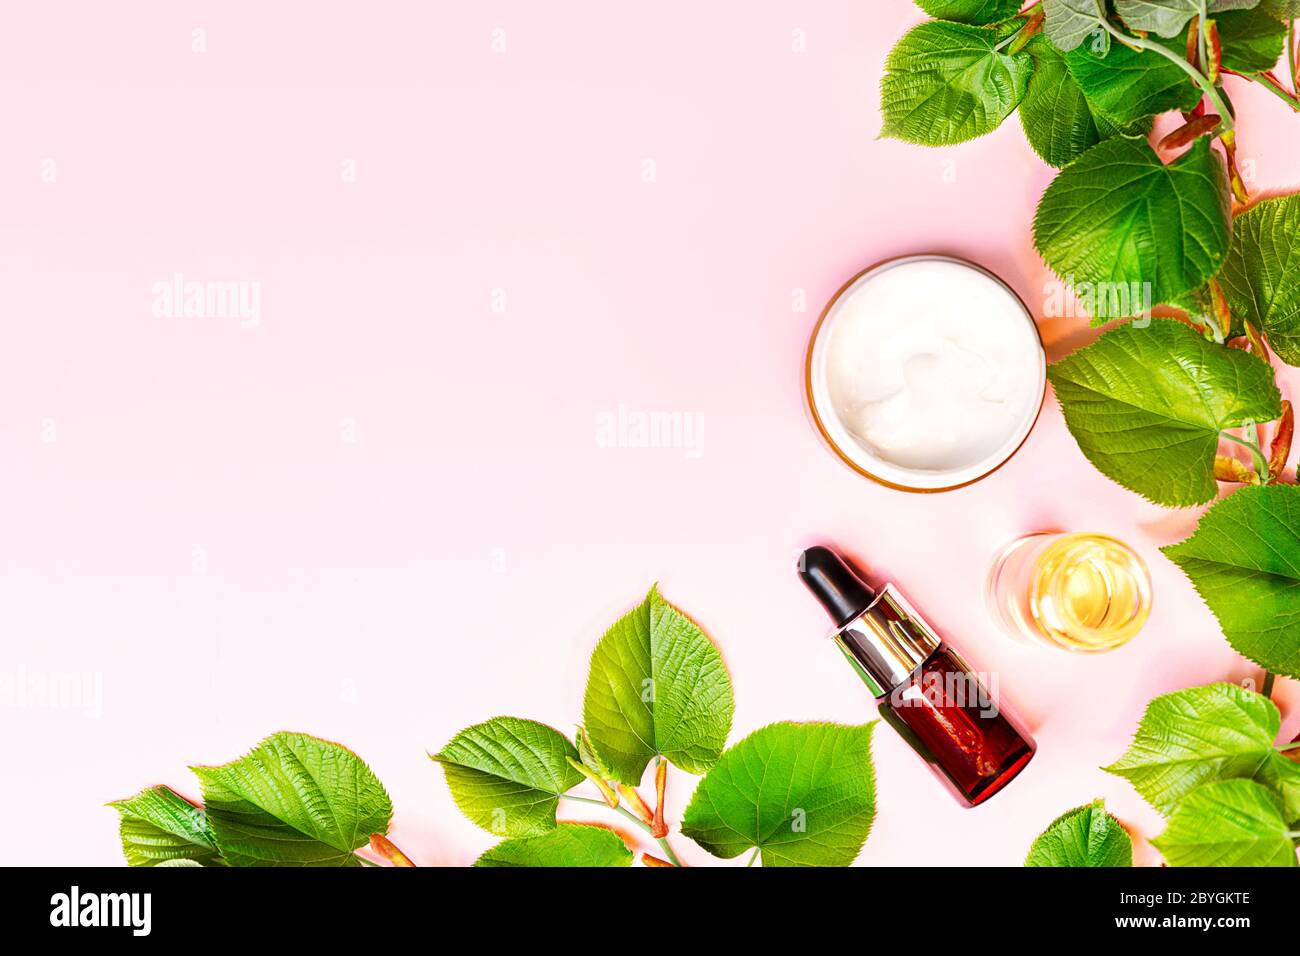 Skin care products, natural cosmetic. Flat lay image on pink background.  Natural cosmetic skincare bottle, serum and organic green leaf. Homemade  and beauty product concept Stock Photo - Alamy